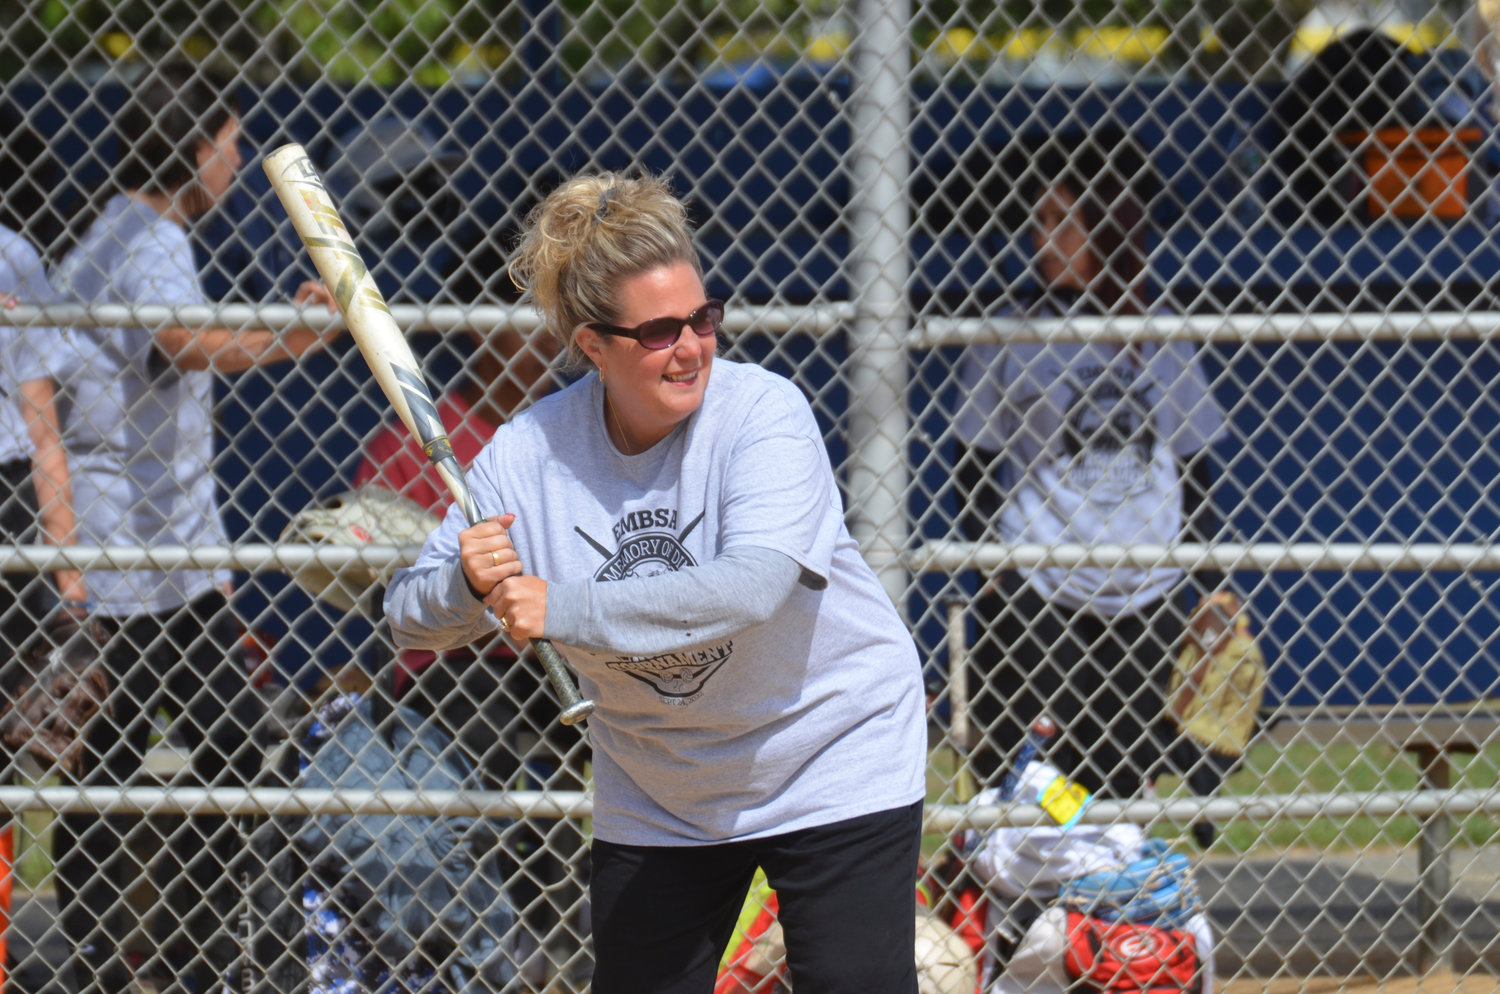 Rose Komis played softball last Saturday in memory of her husband, Dino. Nearly 200 people came out over the course of two days to play.